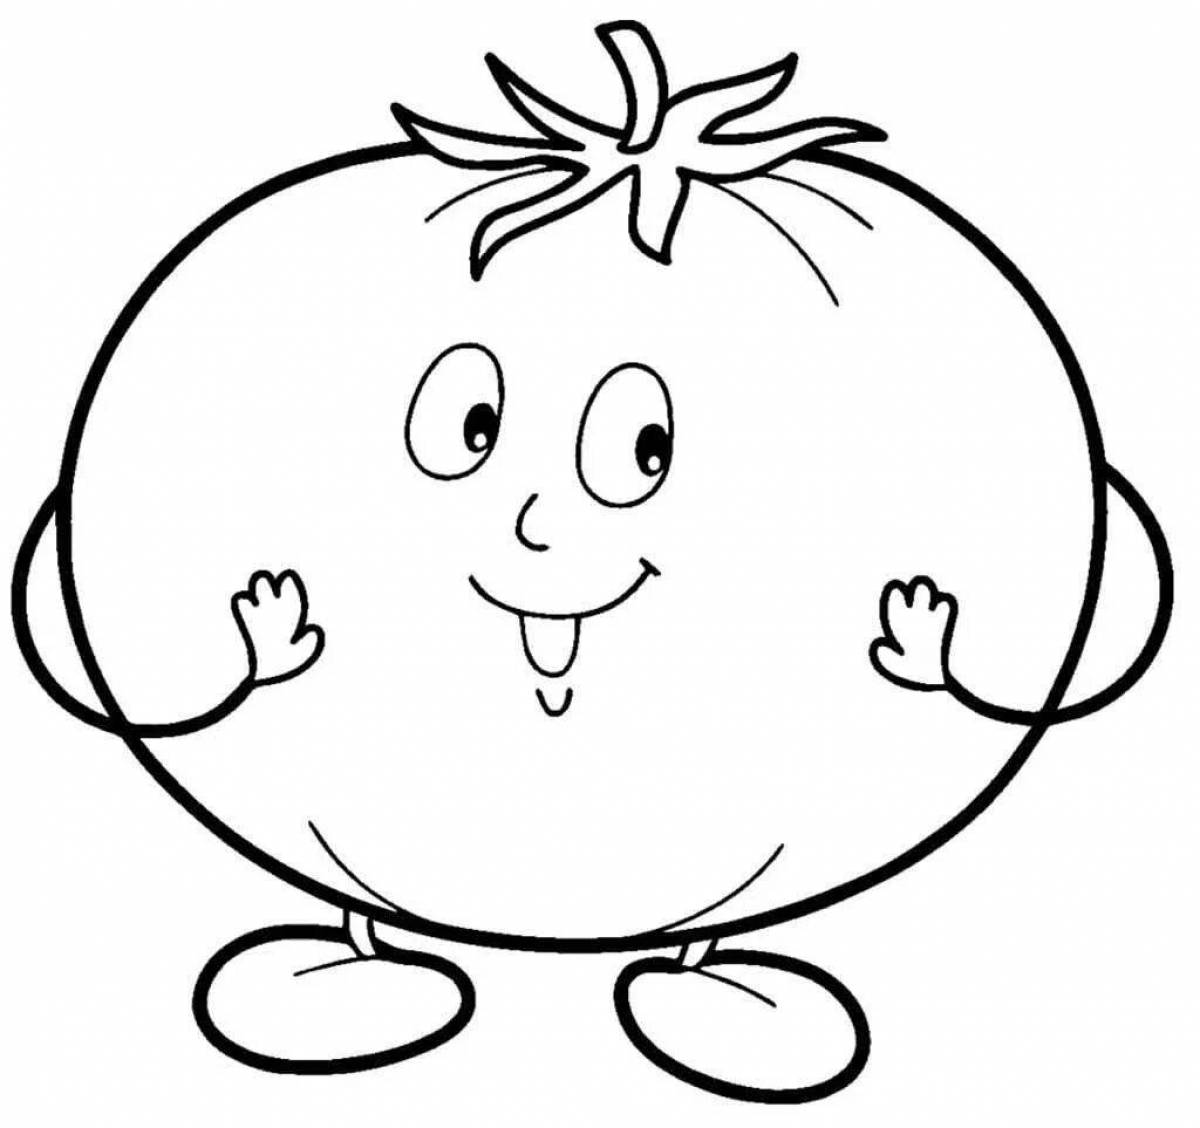 Holiday tomato coloring page